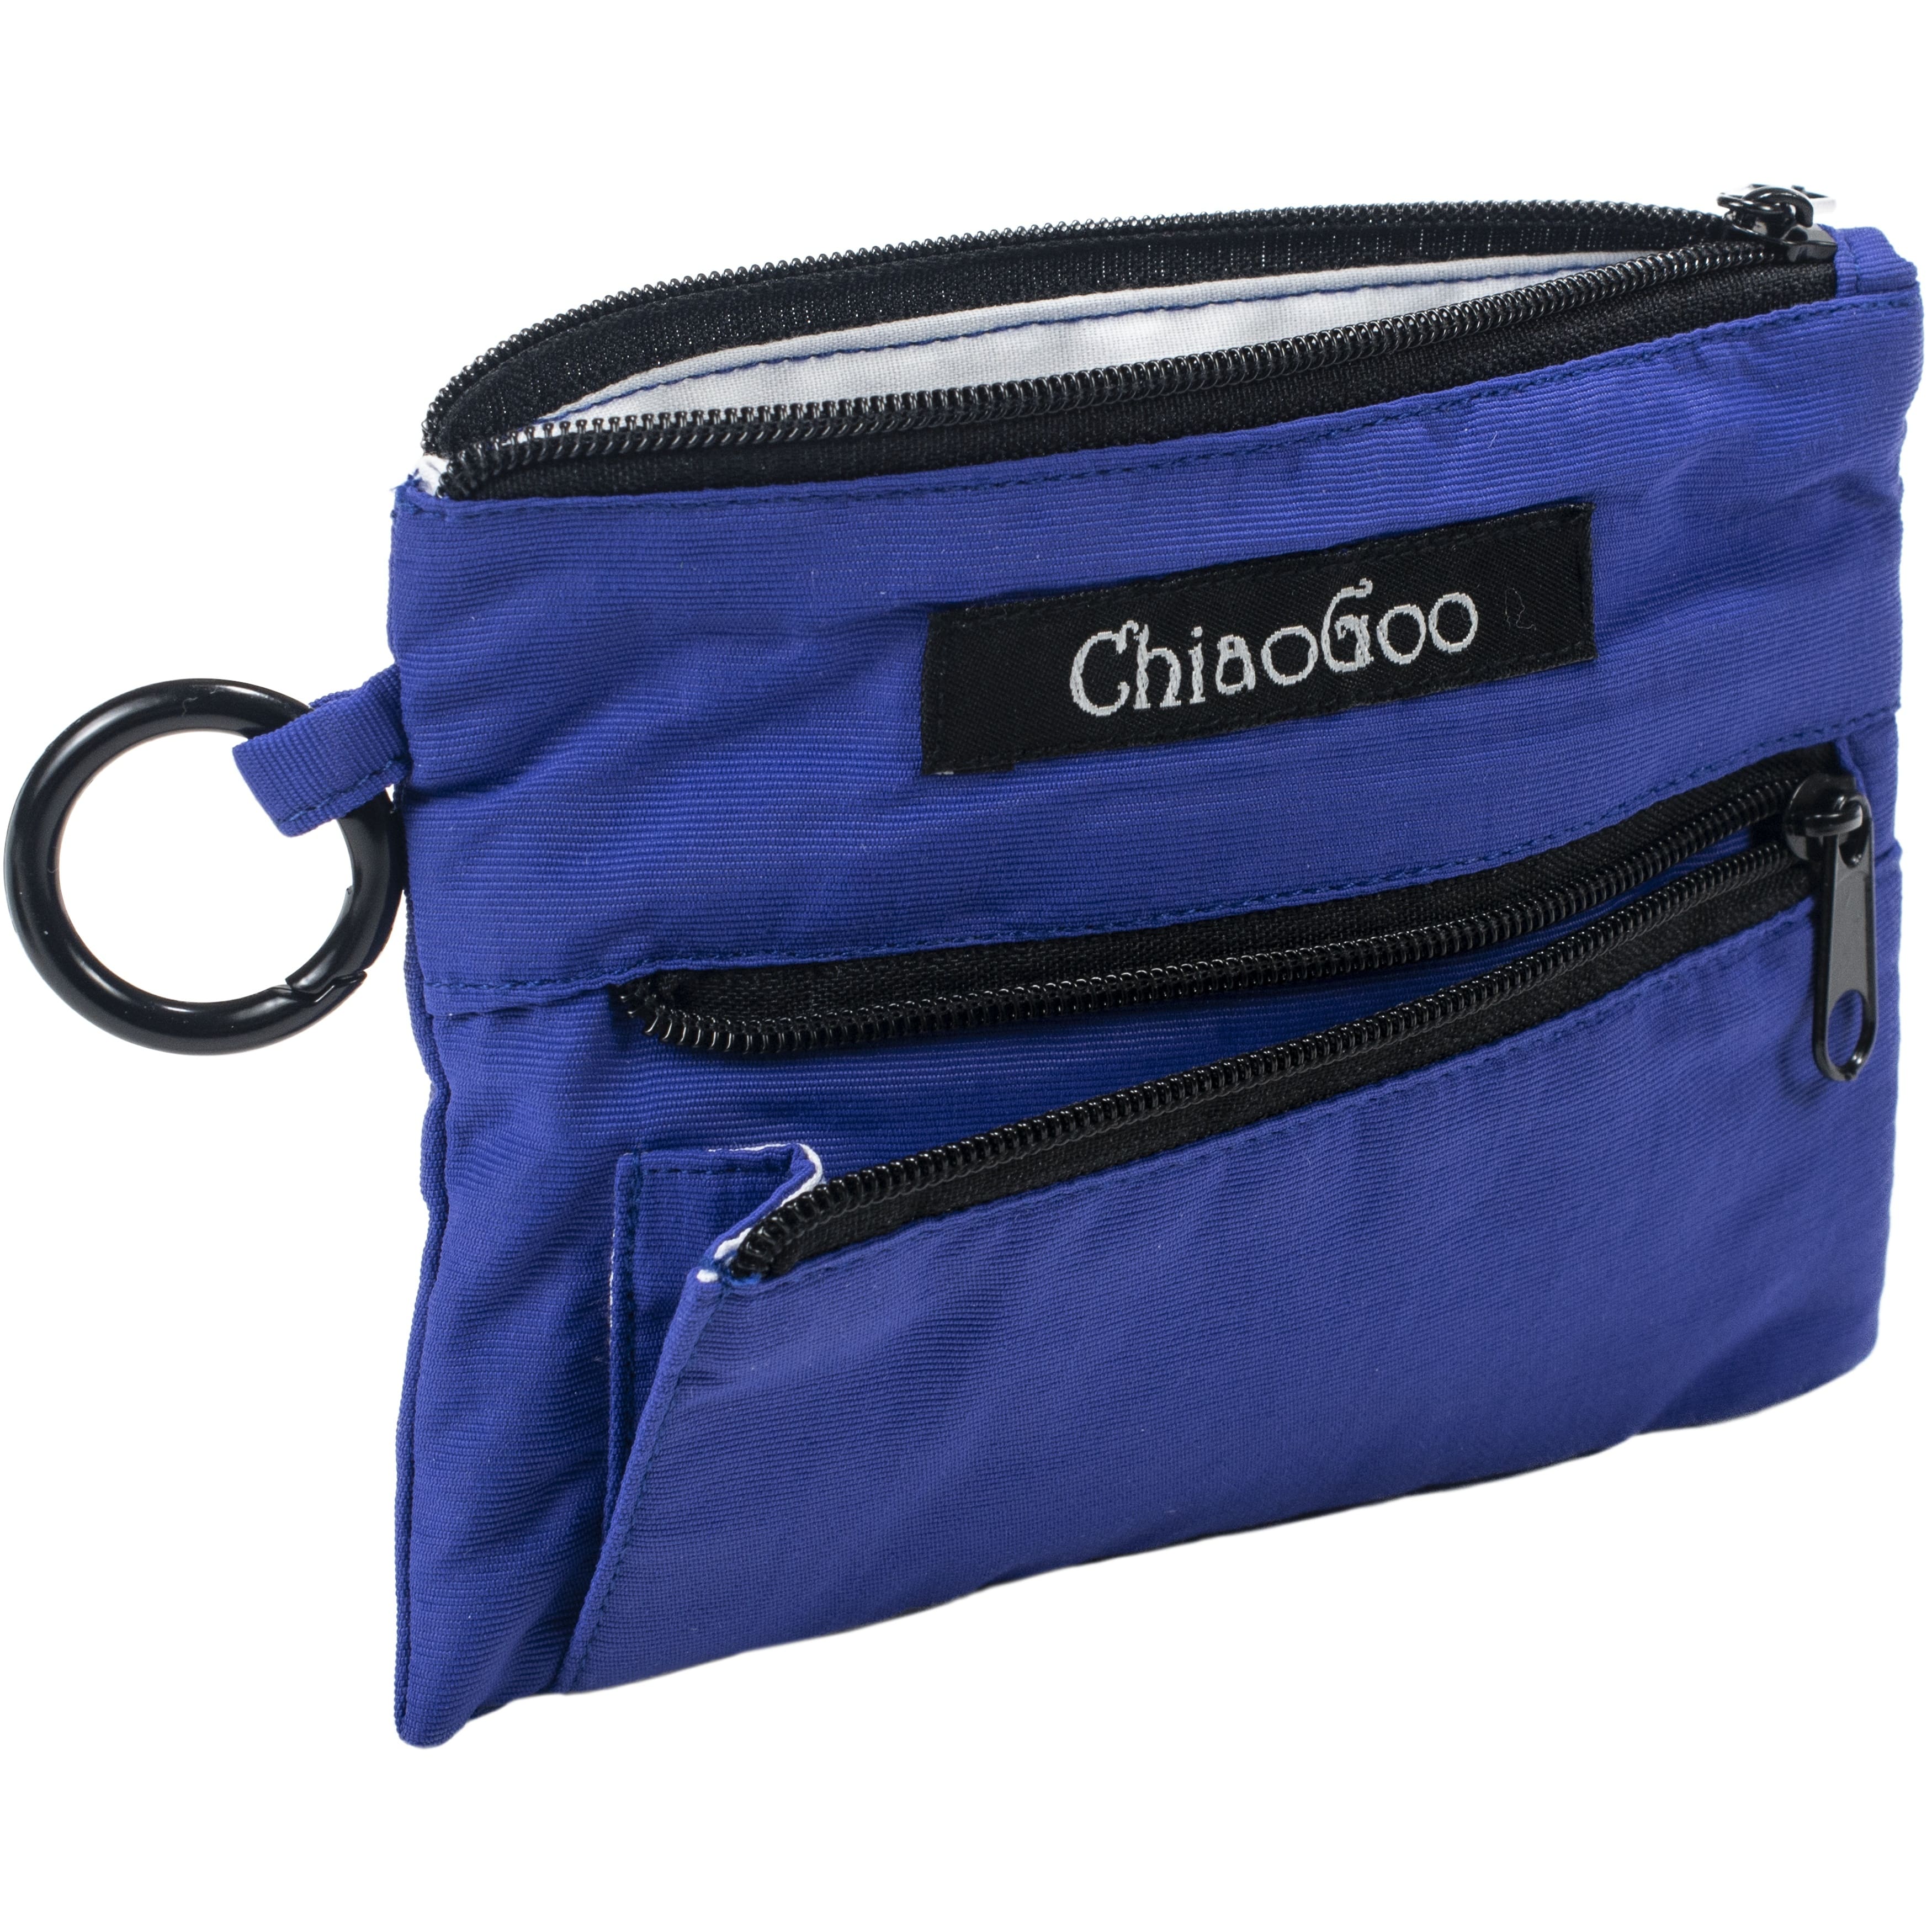 Chiaogoo Twist SHORTIES Set S 5cm and 8cm 2'' and 3'' Interchangeable  Needle Set 3.5-5 Mm 